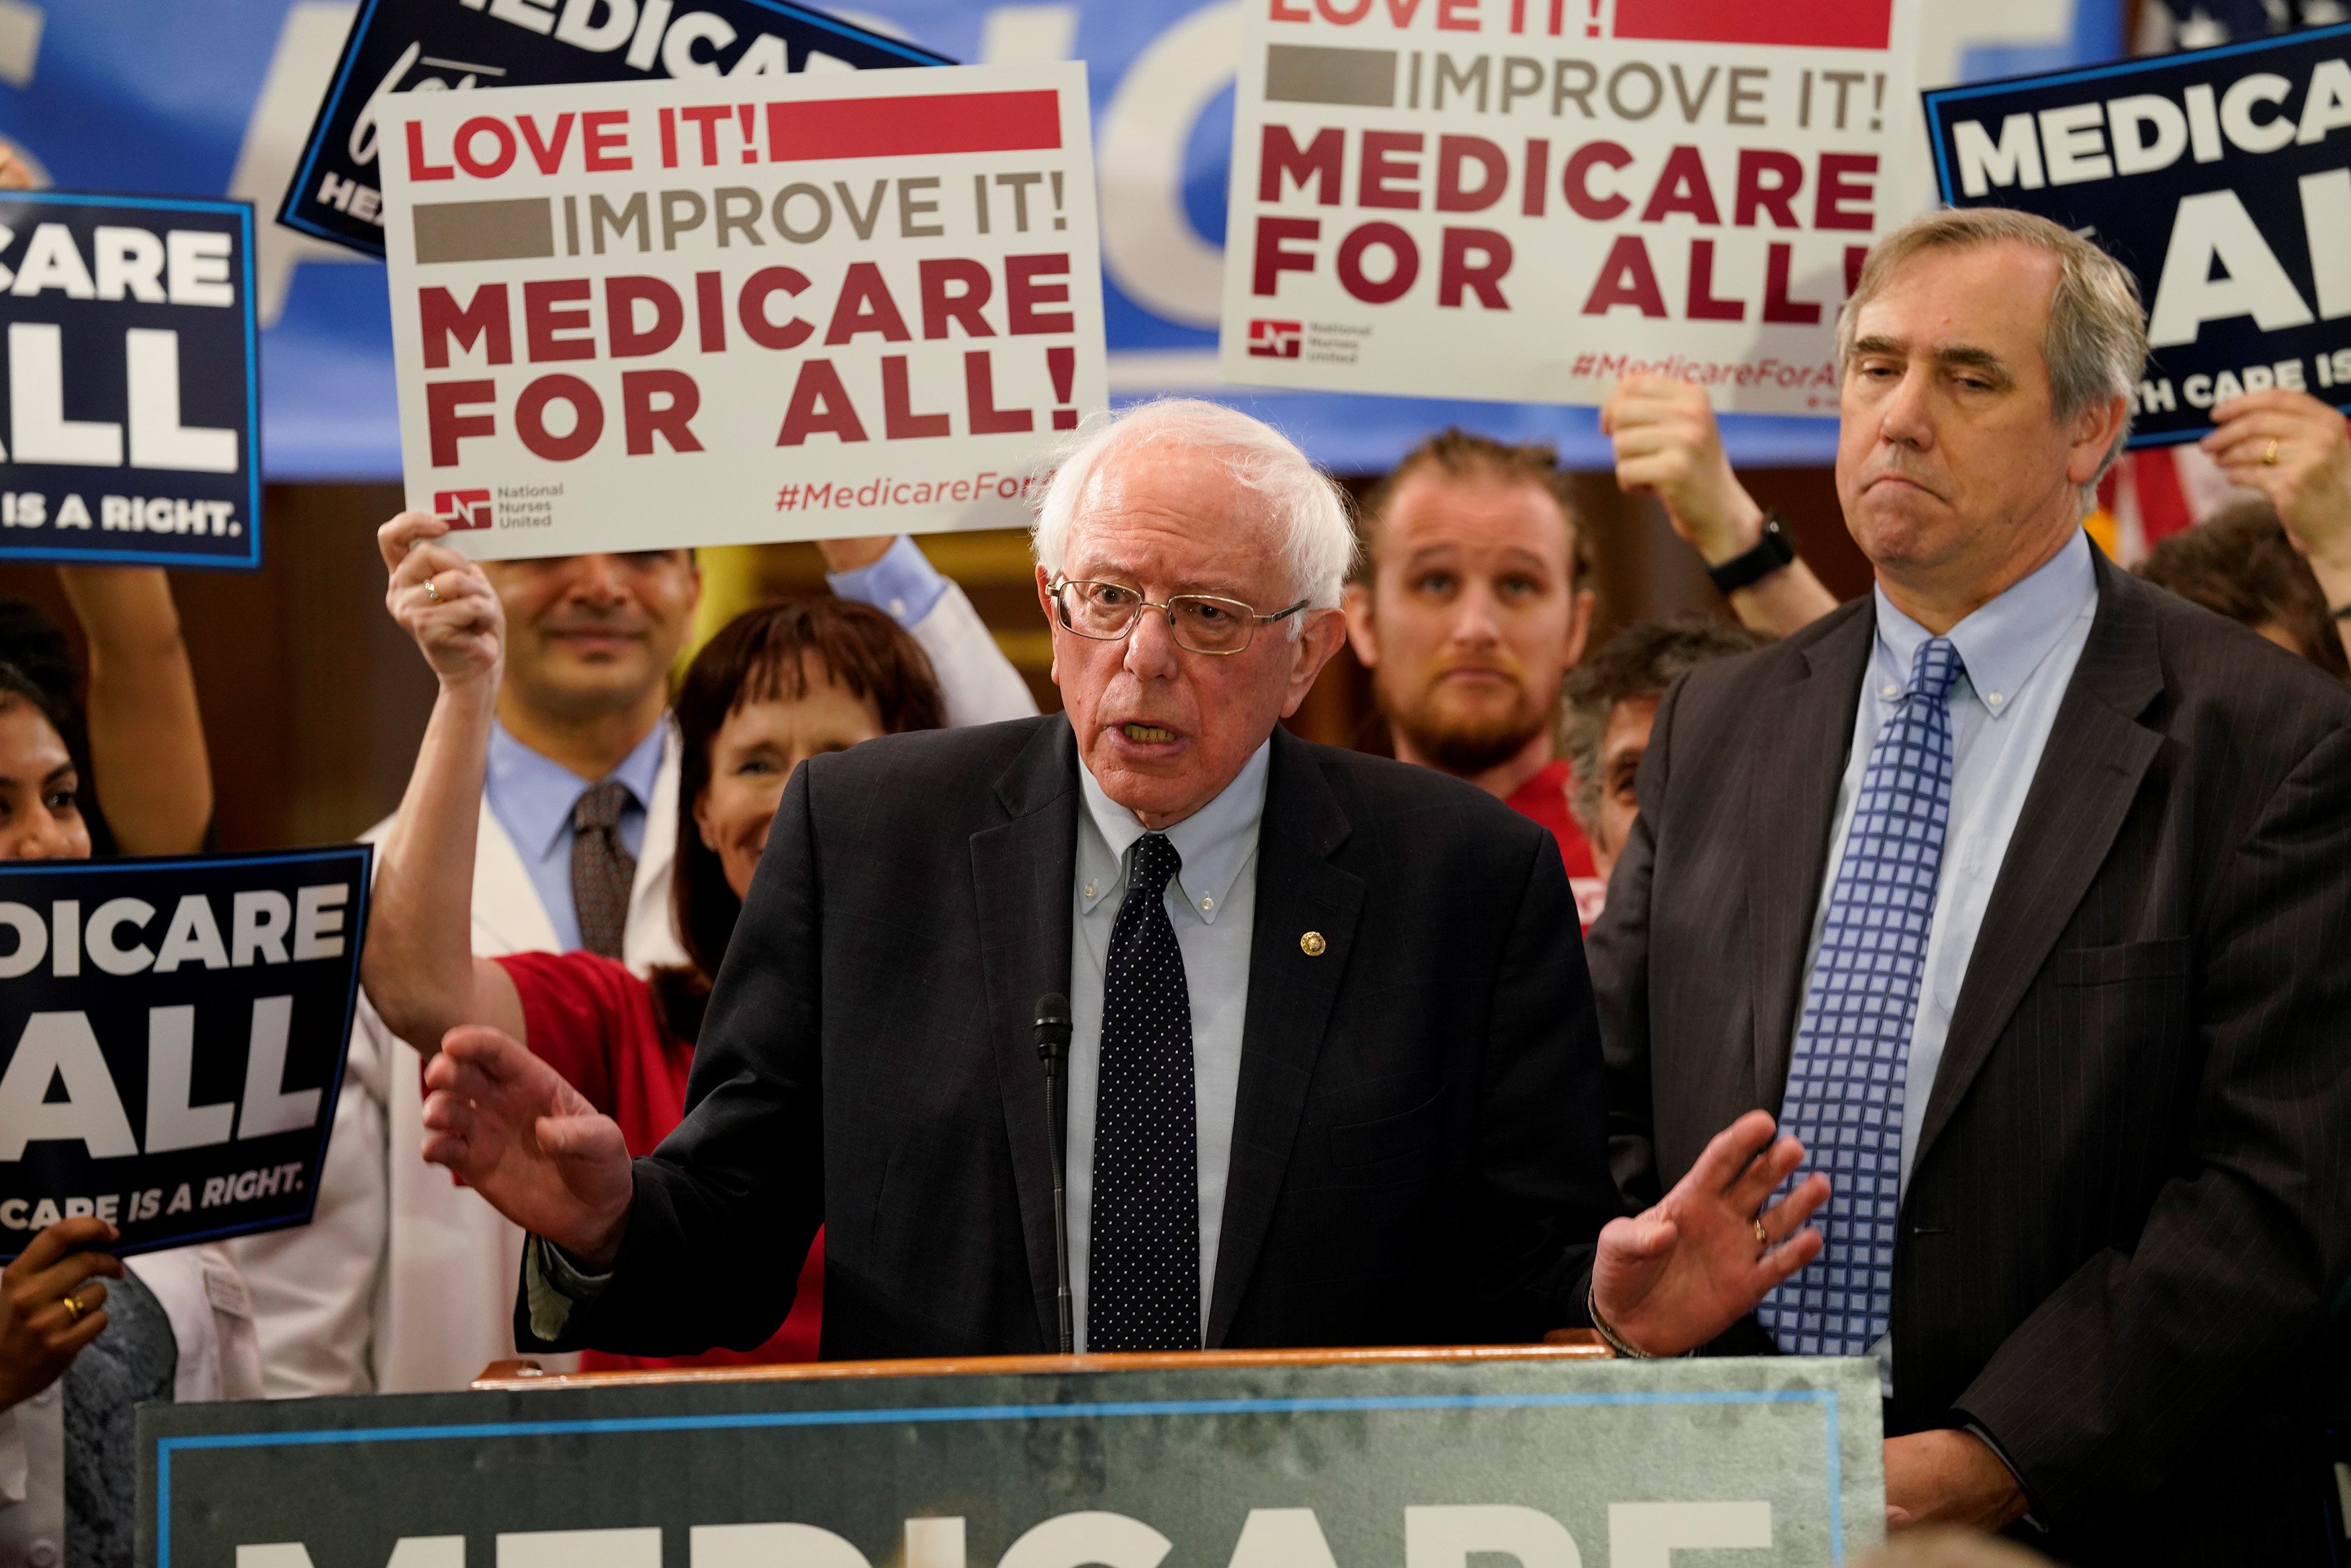 Democratic U.S. presidential candidate U.S. Sen. Bernie Sanders (I-VT) speaks at a news conference to introduce the "Medicare for All Act of 2019" on Capitol Hill in Washington, U.S., April 10, 2019. REUTERS/Aaron P. Bernstein 